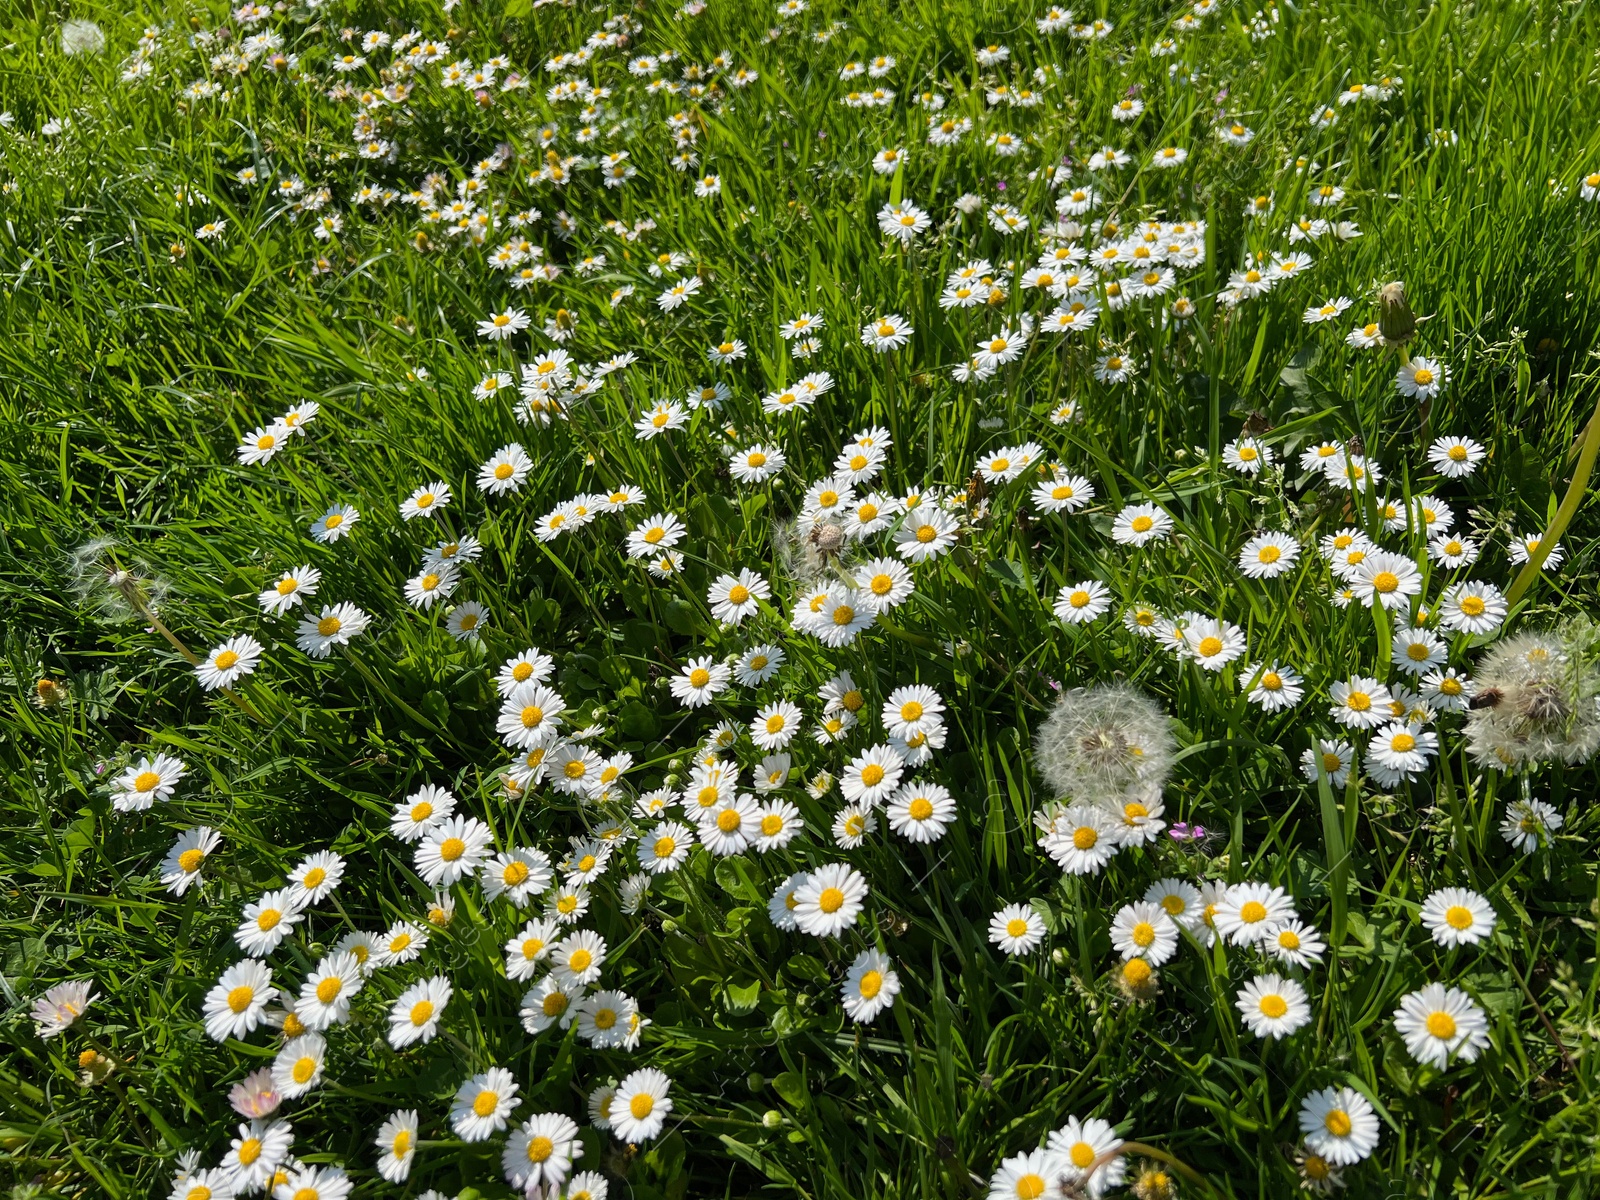 Photo of Beautiful white daisy flowers, dandelions and green grass growing outdoors